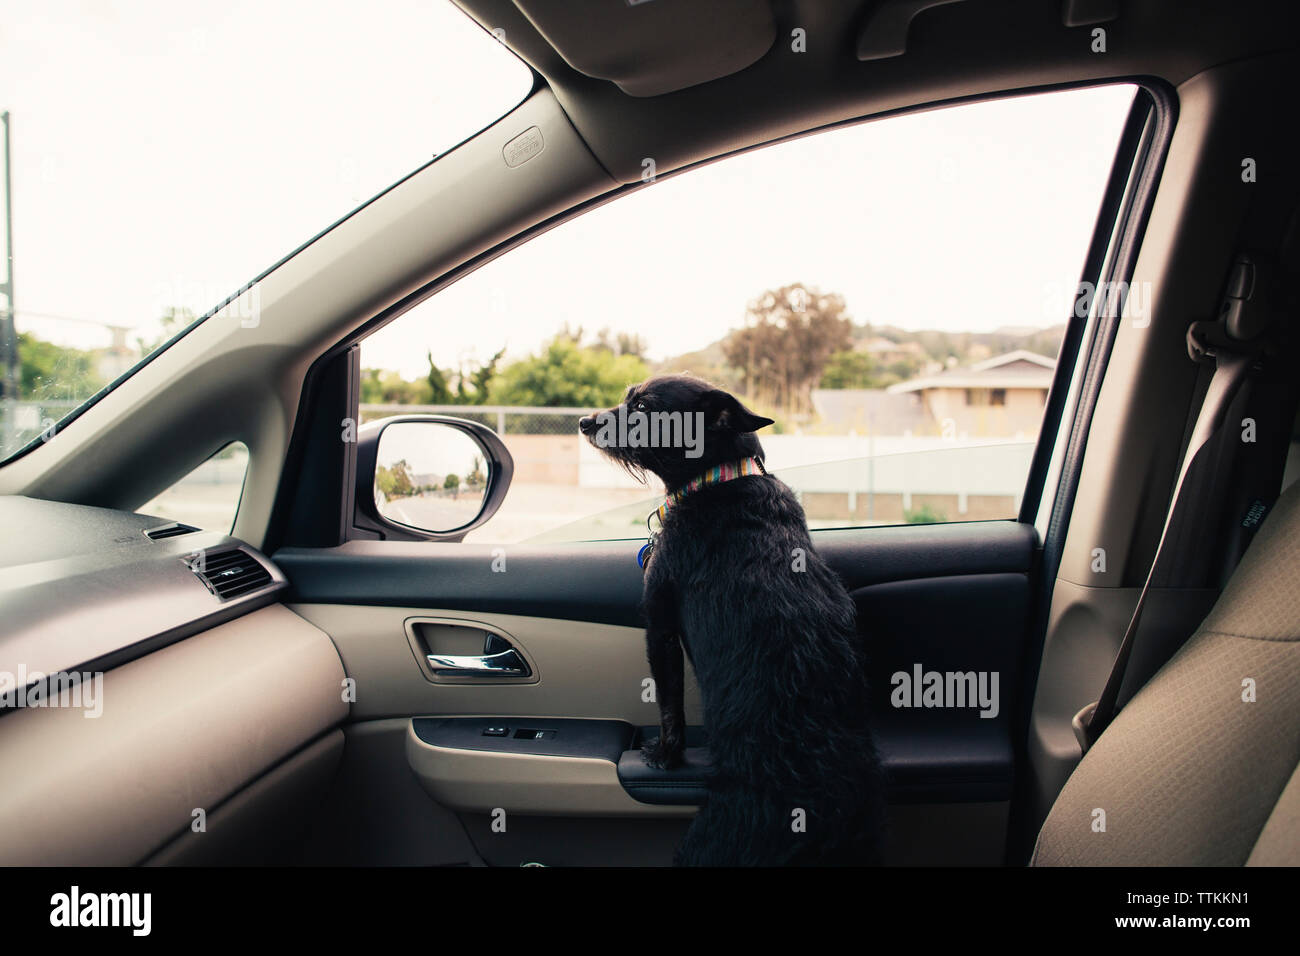 Dog looking away while rearing up in car Stock Photo